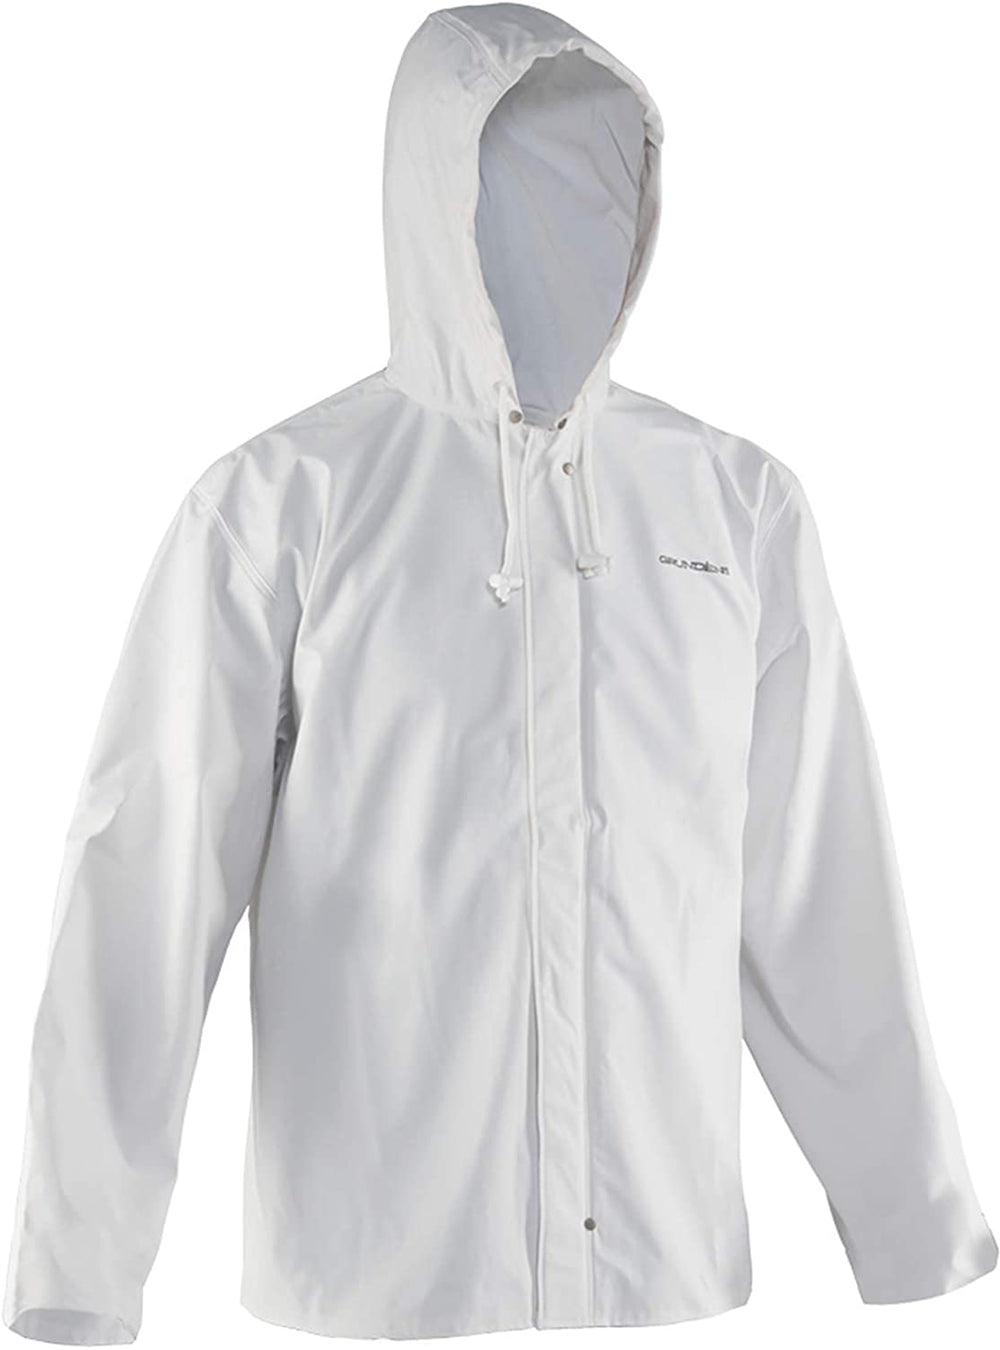 Petrus 82 Jacket in White color from the front view